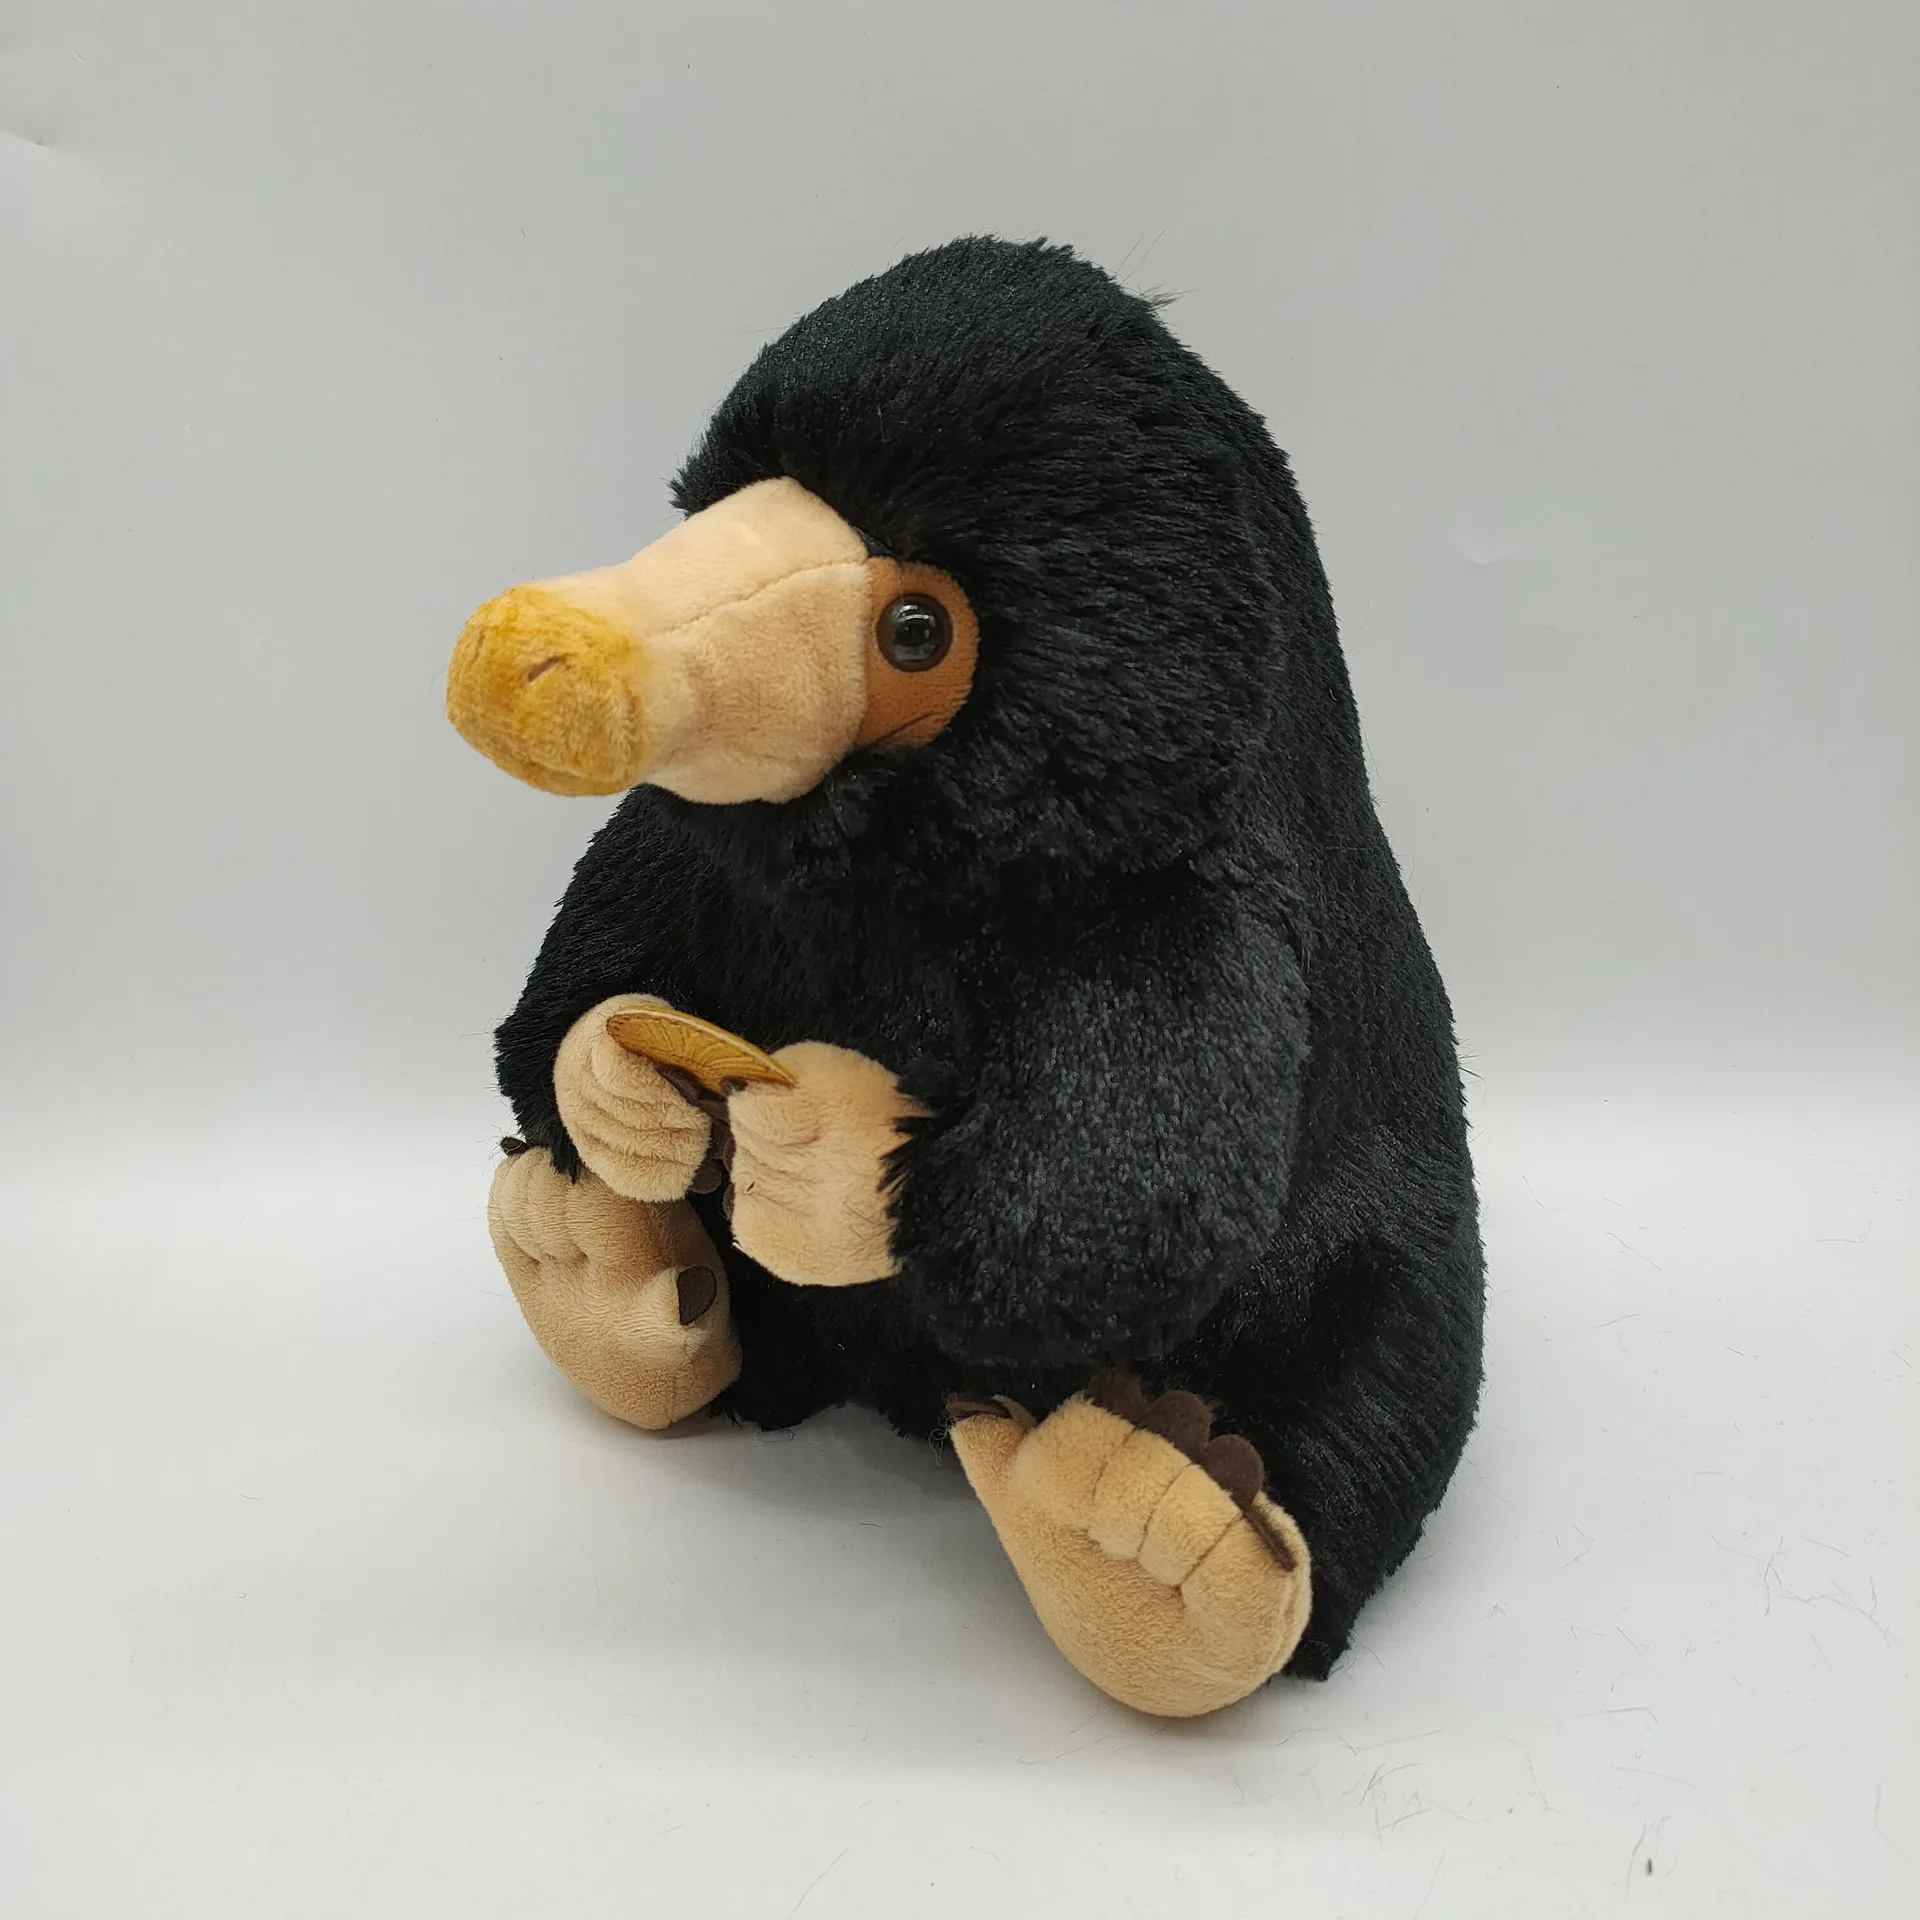 

2022 New Fantastic Beasts and Where to Find Them Niffler Doll Plush Toy Black Duckbills Soft Stuffed Animals For Kids Gift